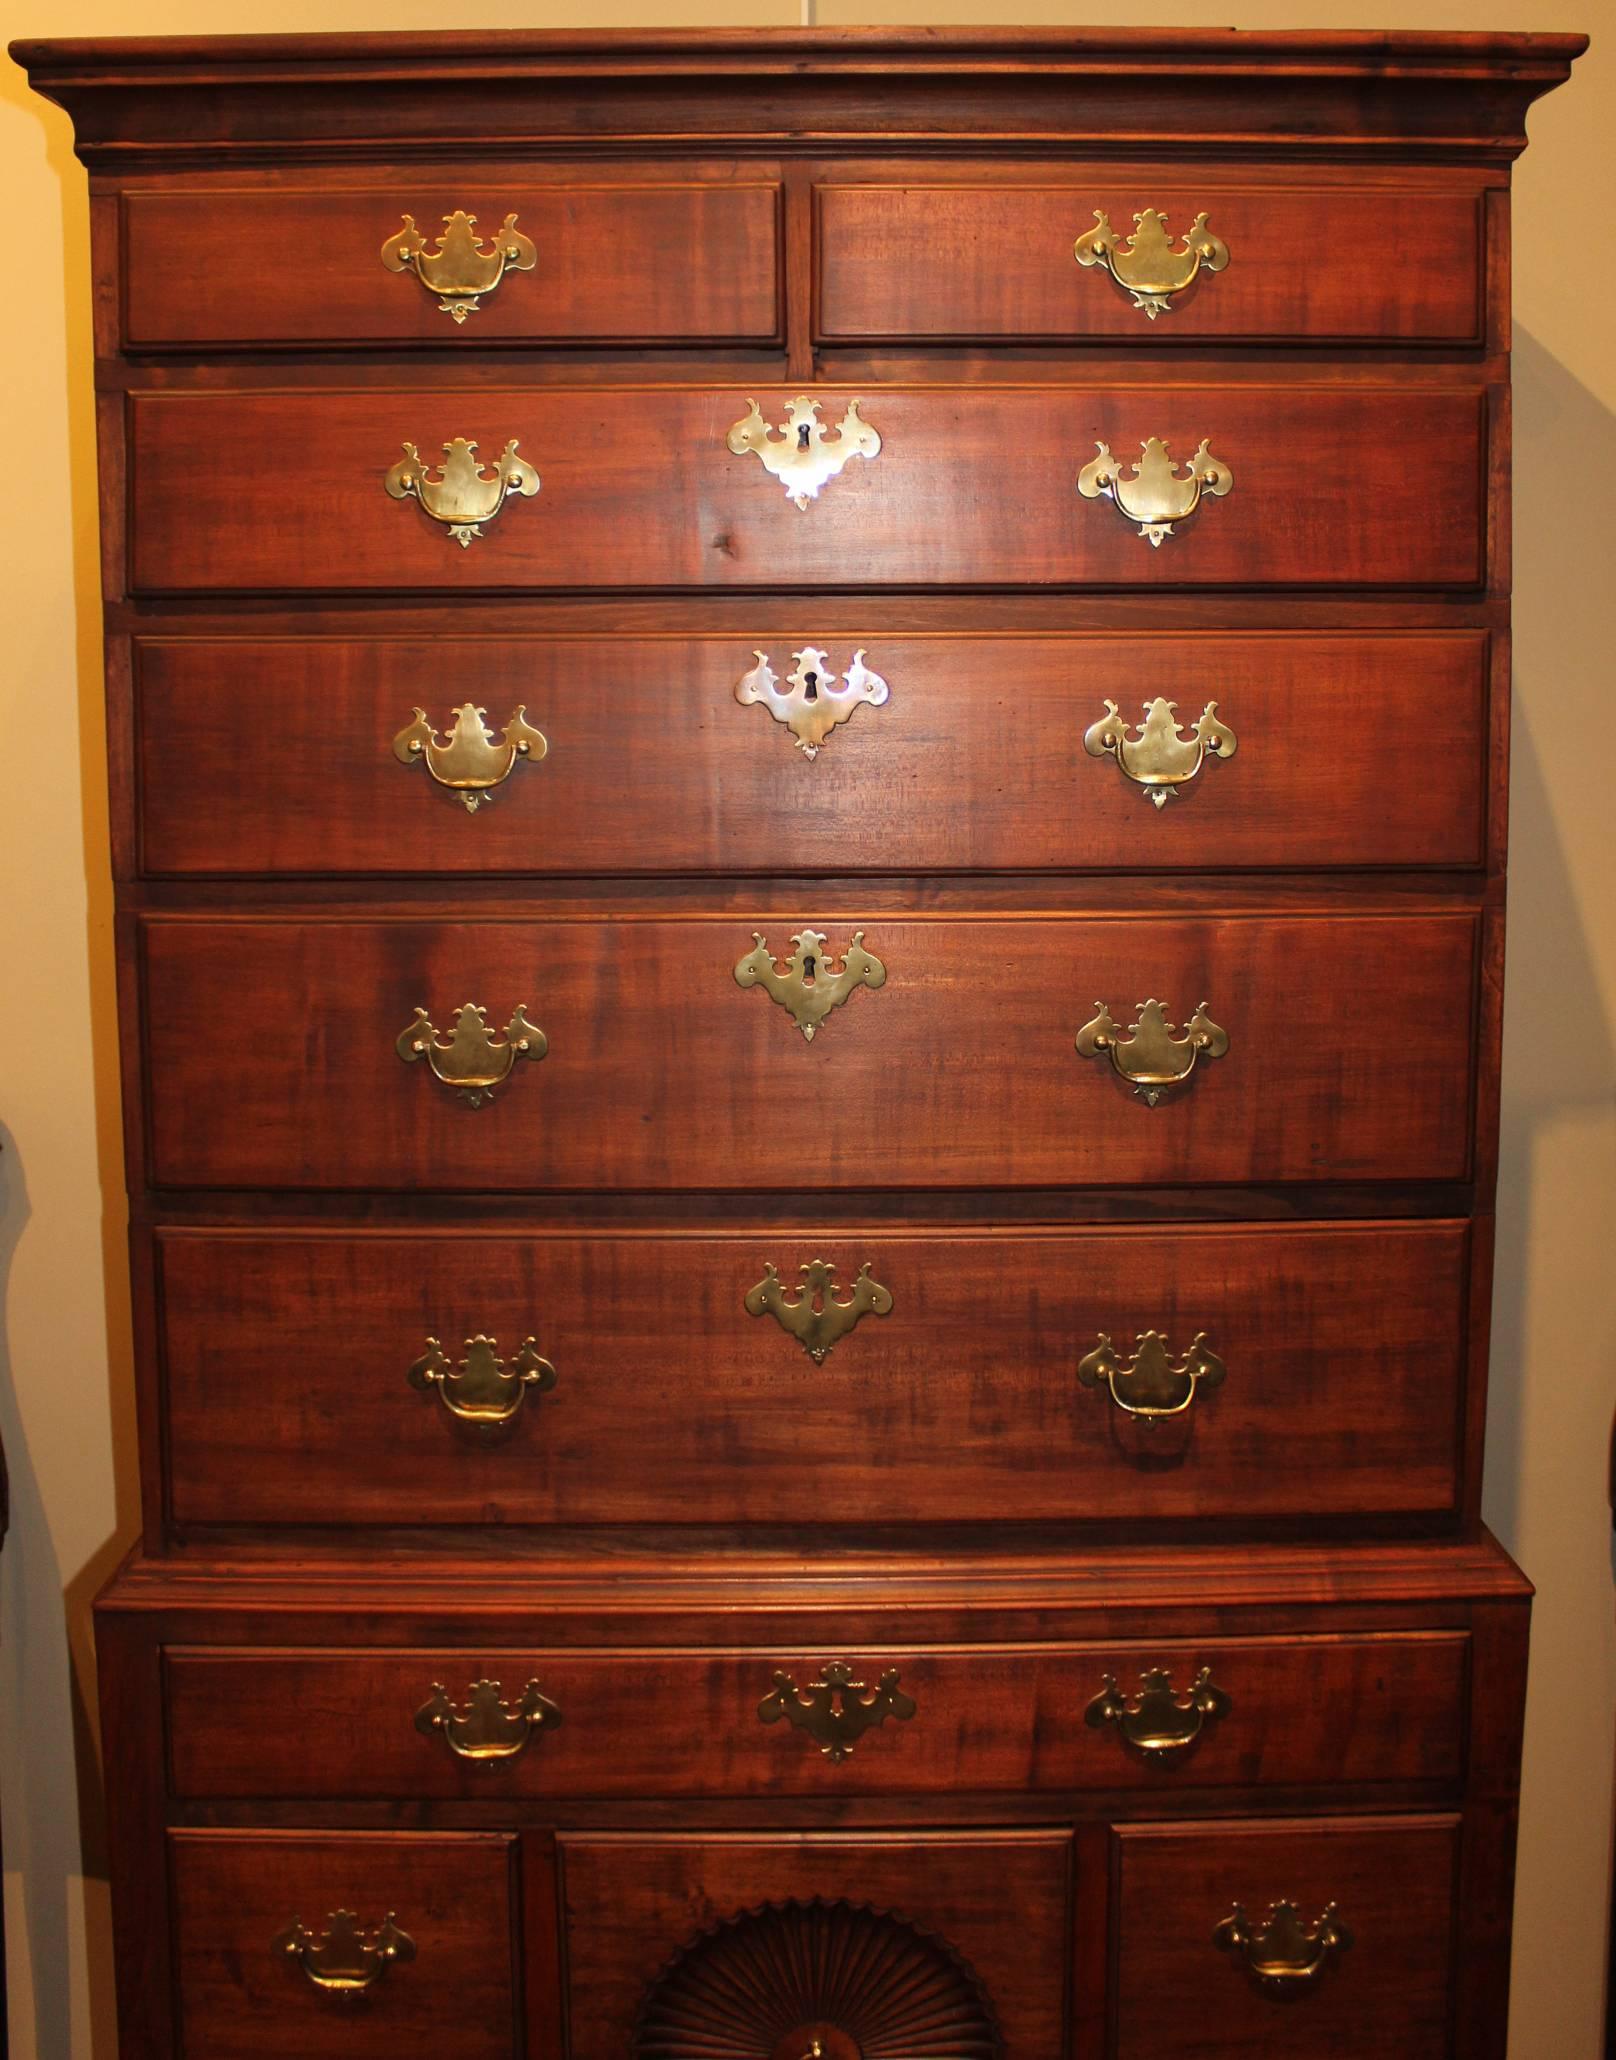 This handsome high chest in figured maple has great verticality having tall Queen Anne legs and a rather narrow and tall upper case. It is a nice early example with rosehead nail construction throughout and a beautifully executed fan in the base.